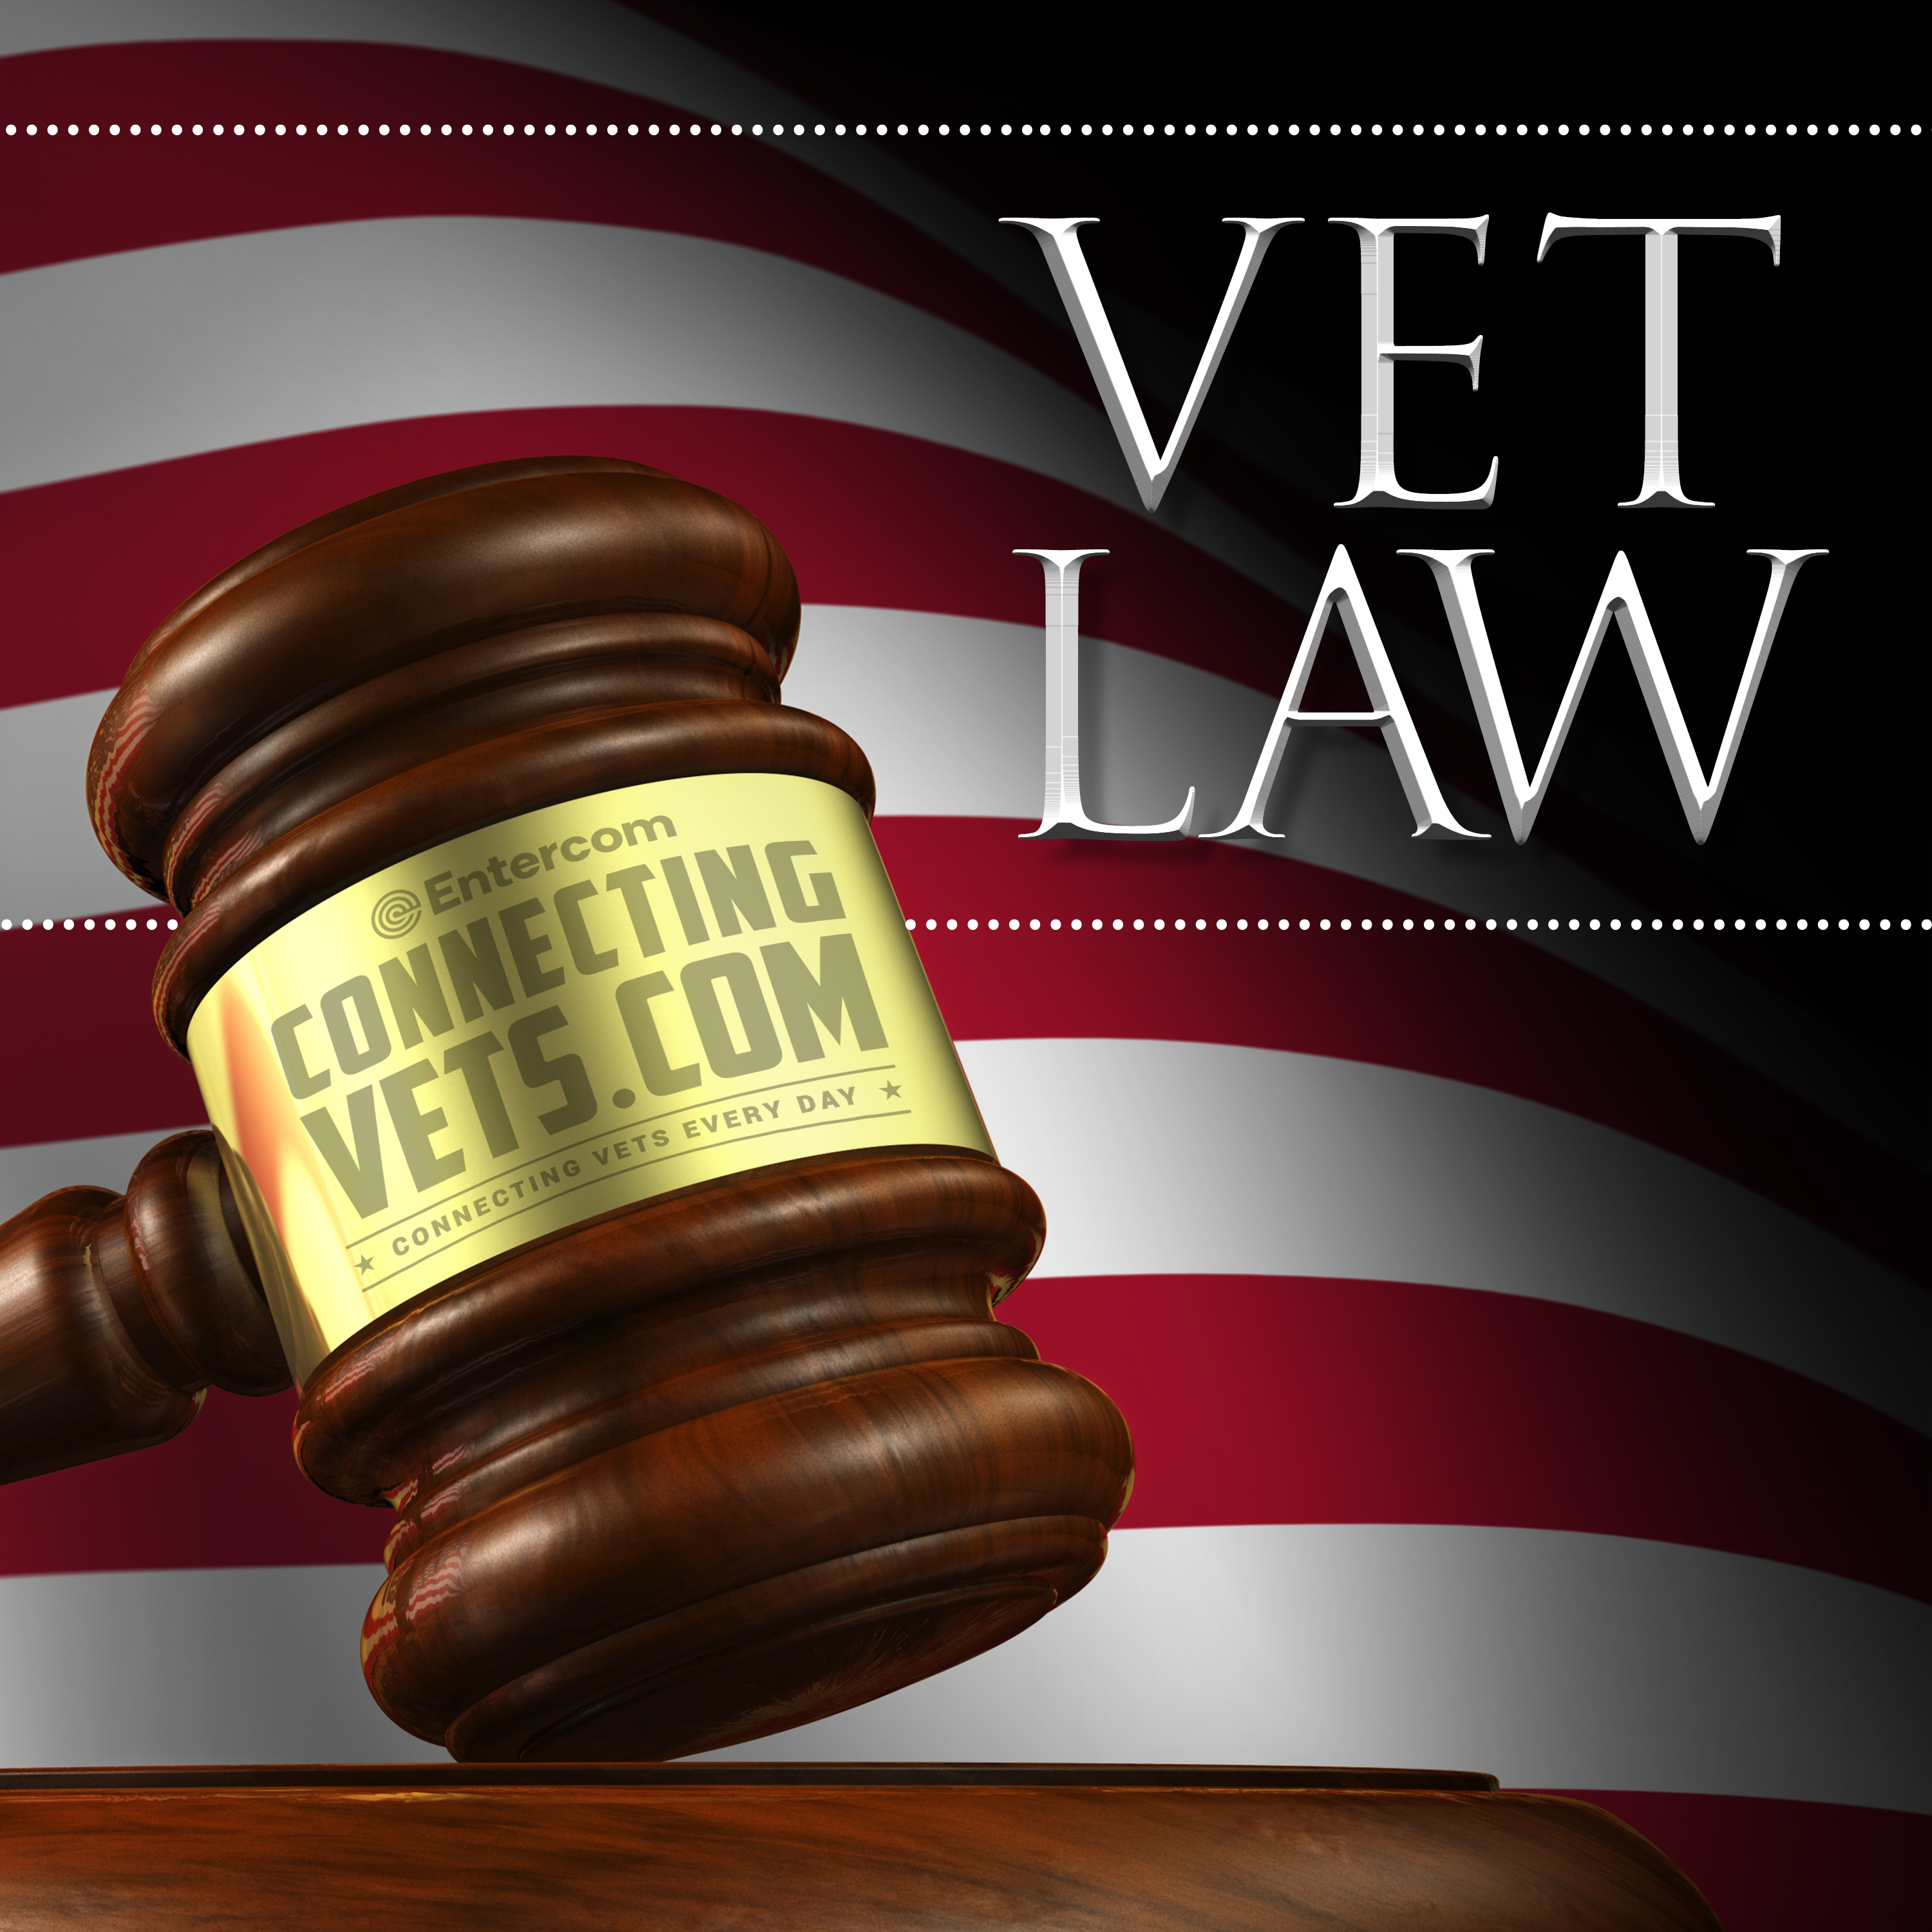 Vet Law: "Got Busted? Justice for Vets.org  Helps Vets find Hope"